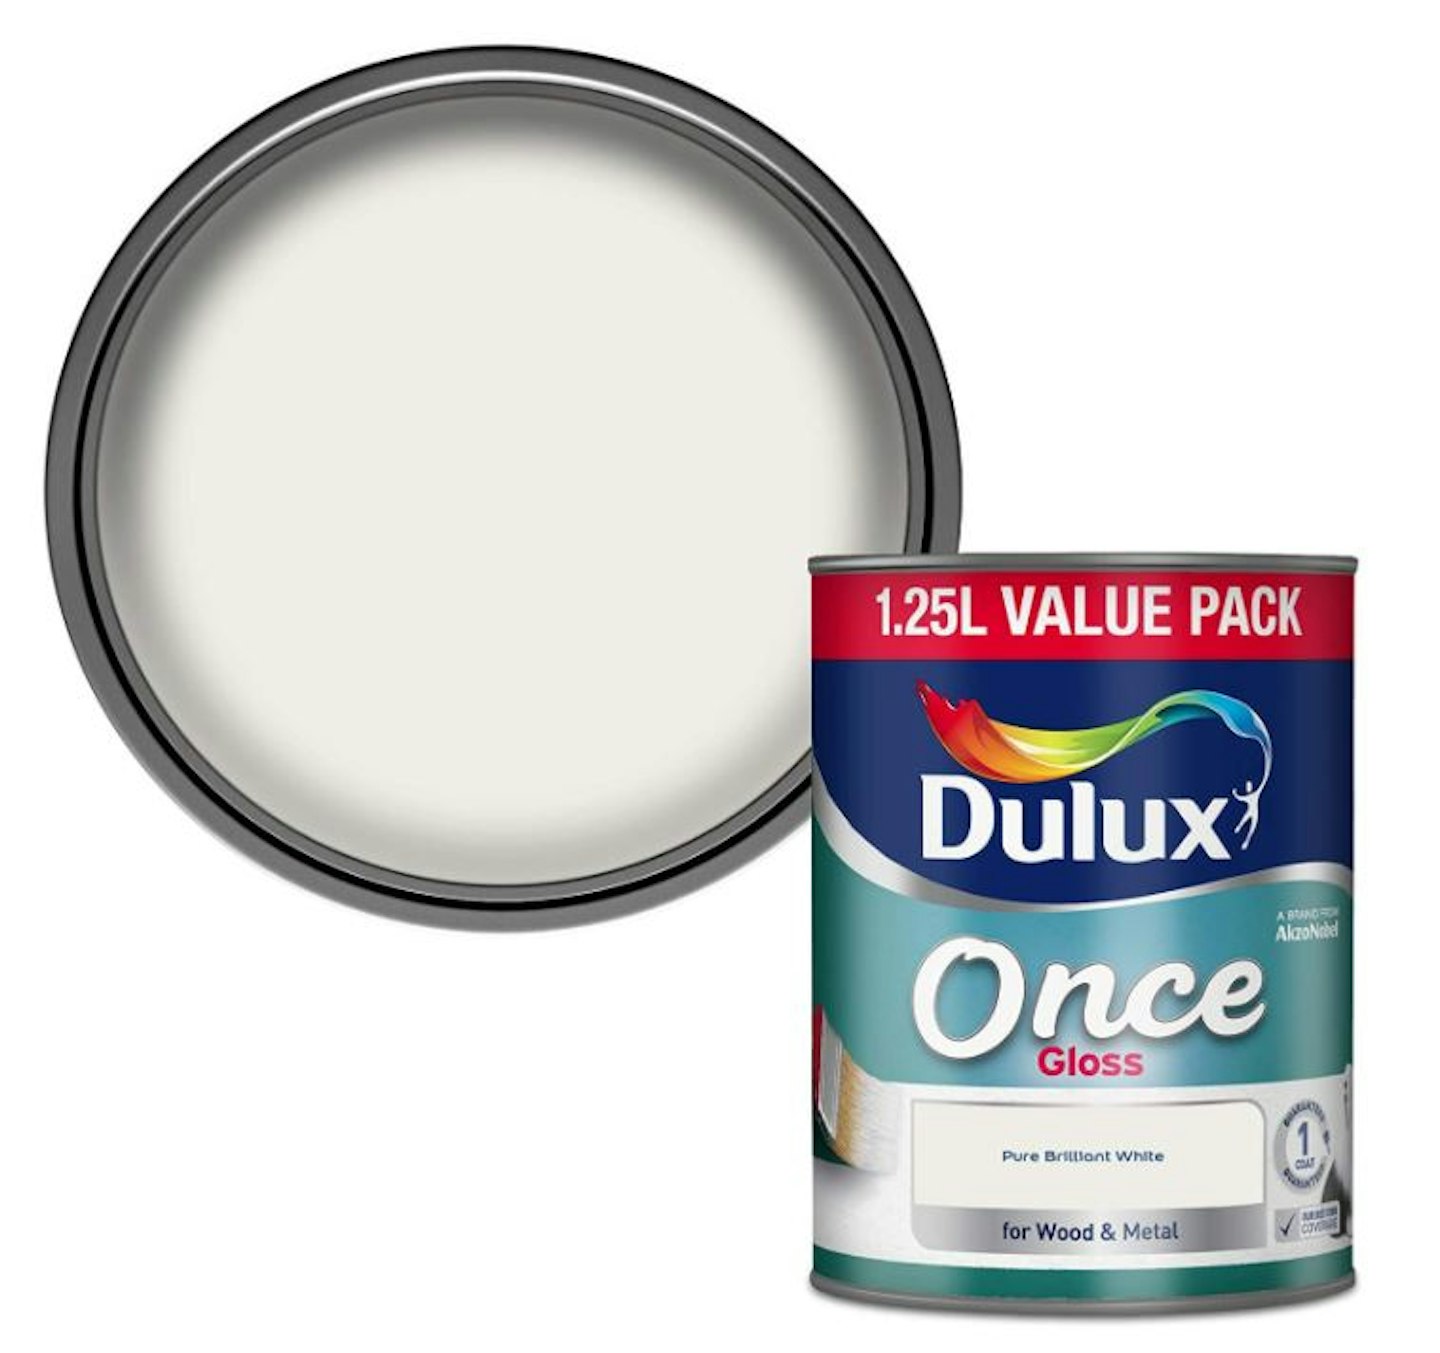 Dulux Once Gloss Paint For Wood And Metal